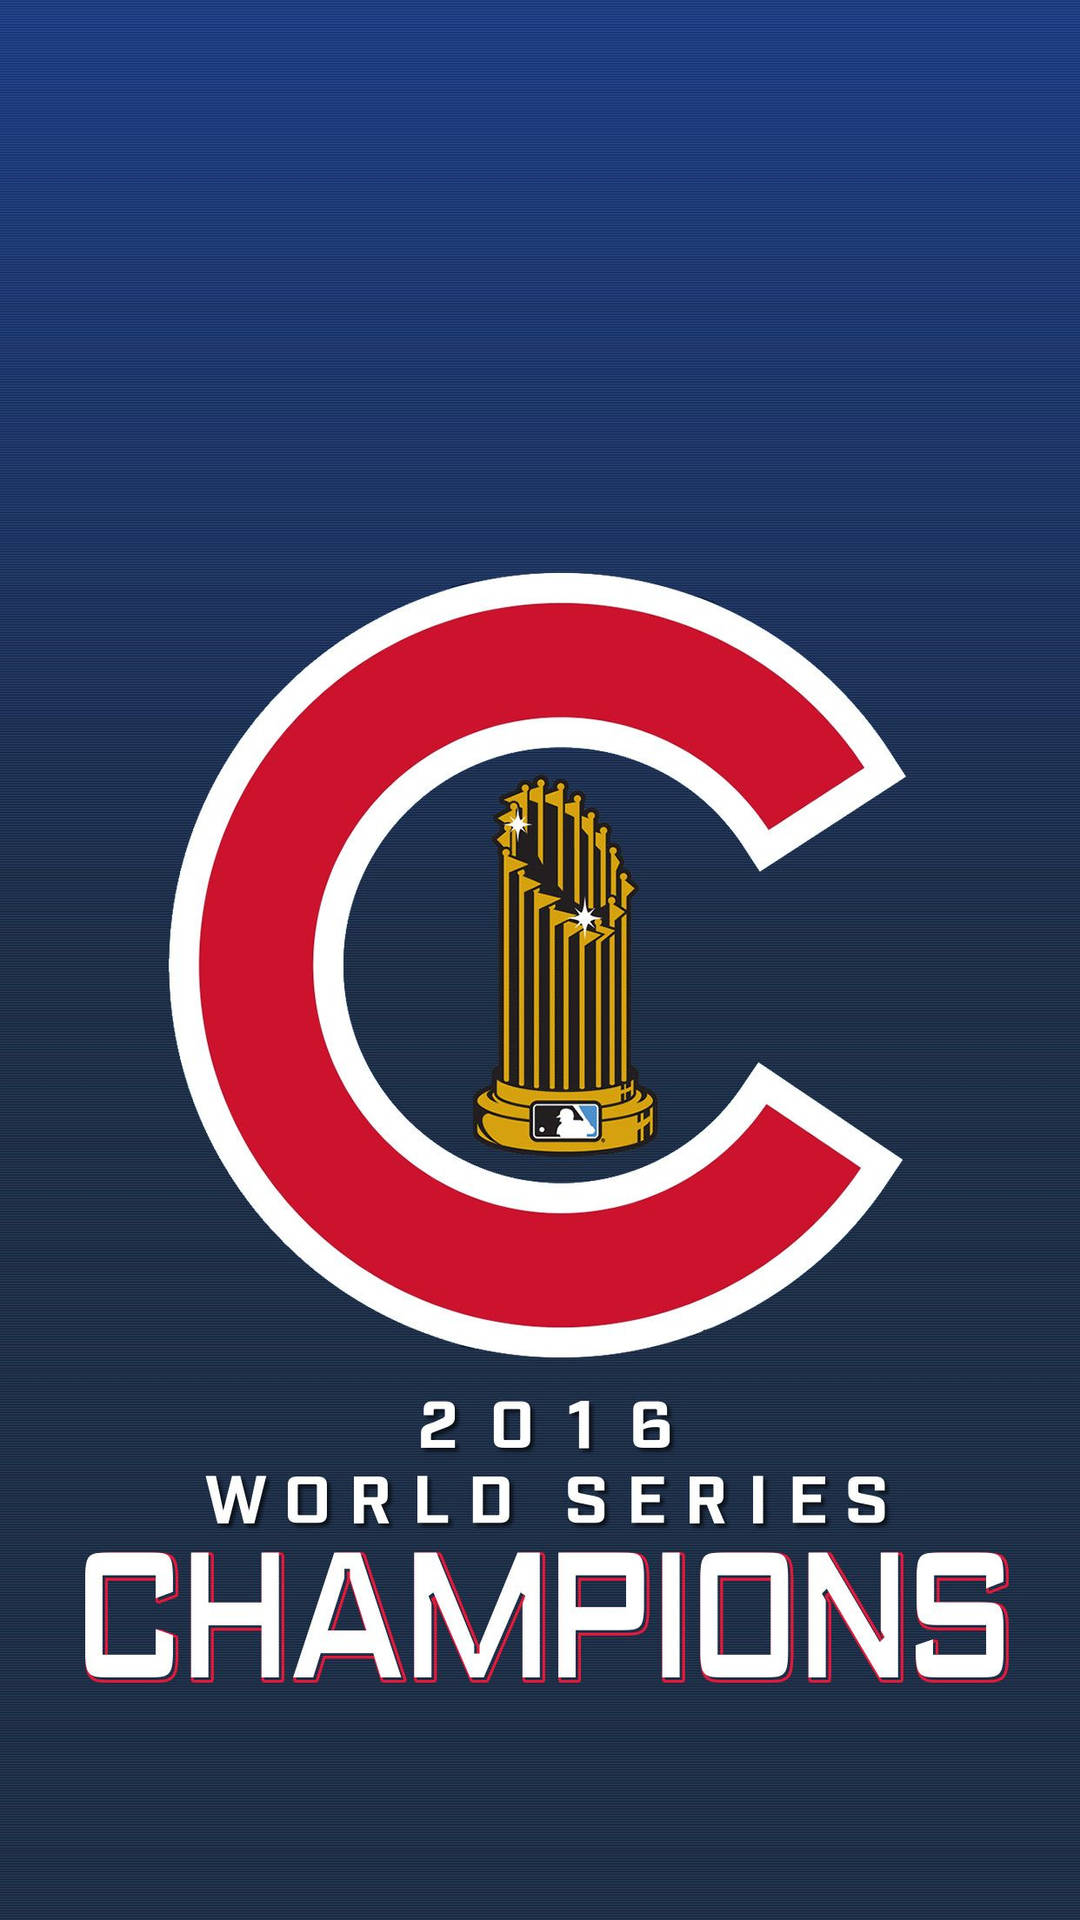 Chicago Cubs World Championship Background